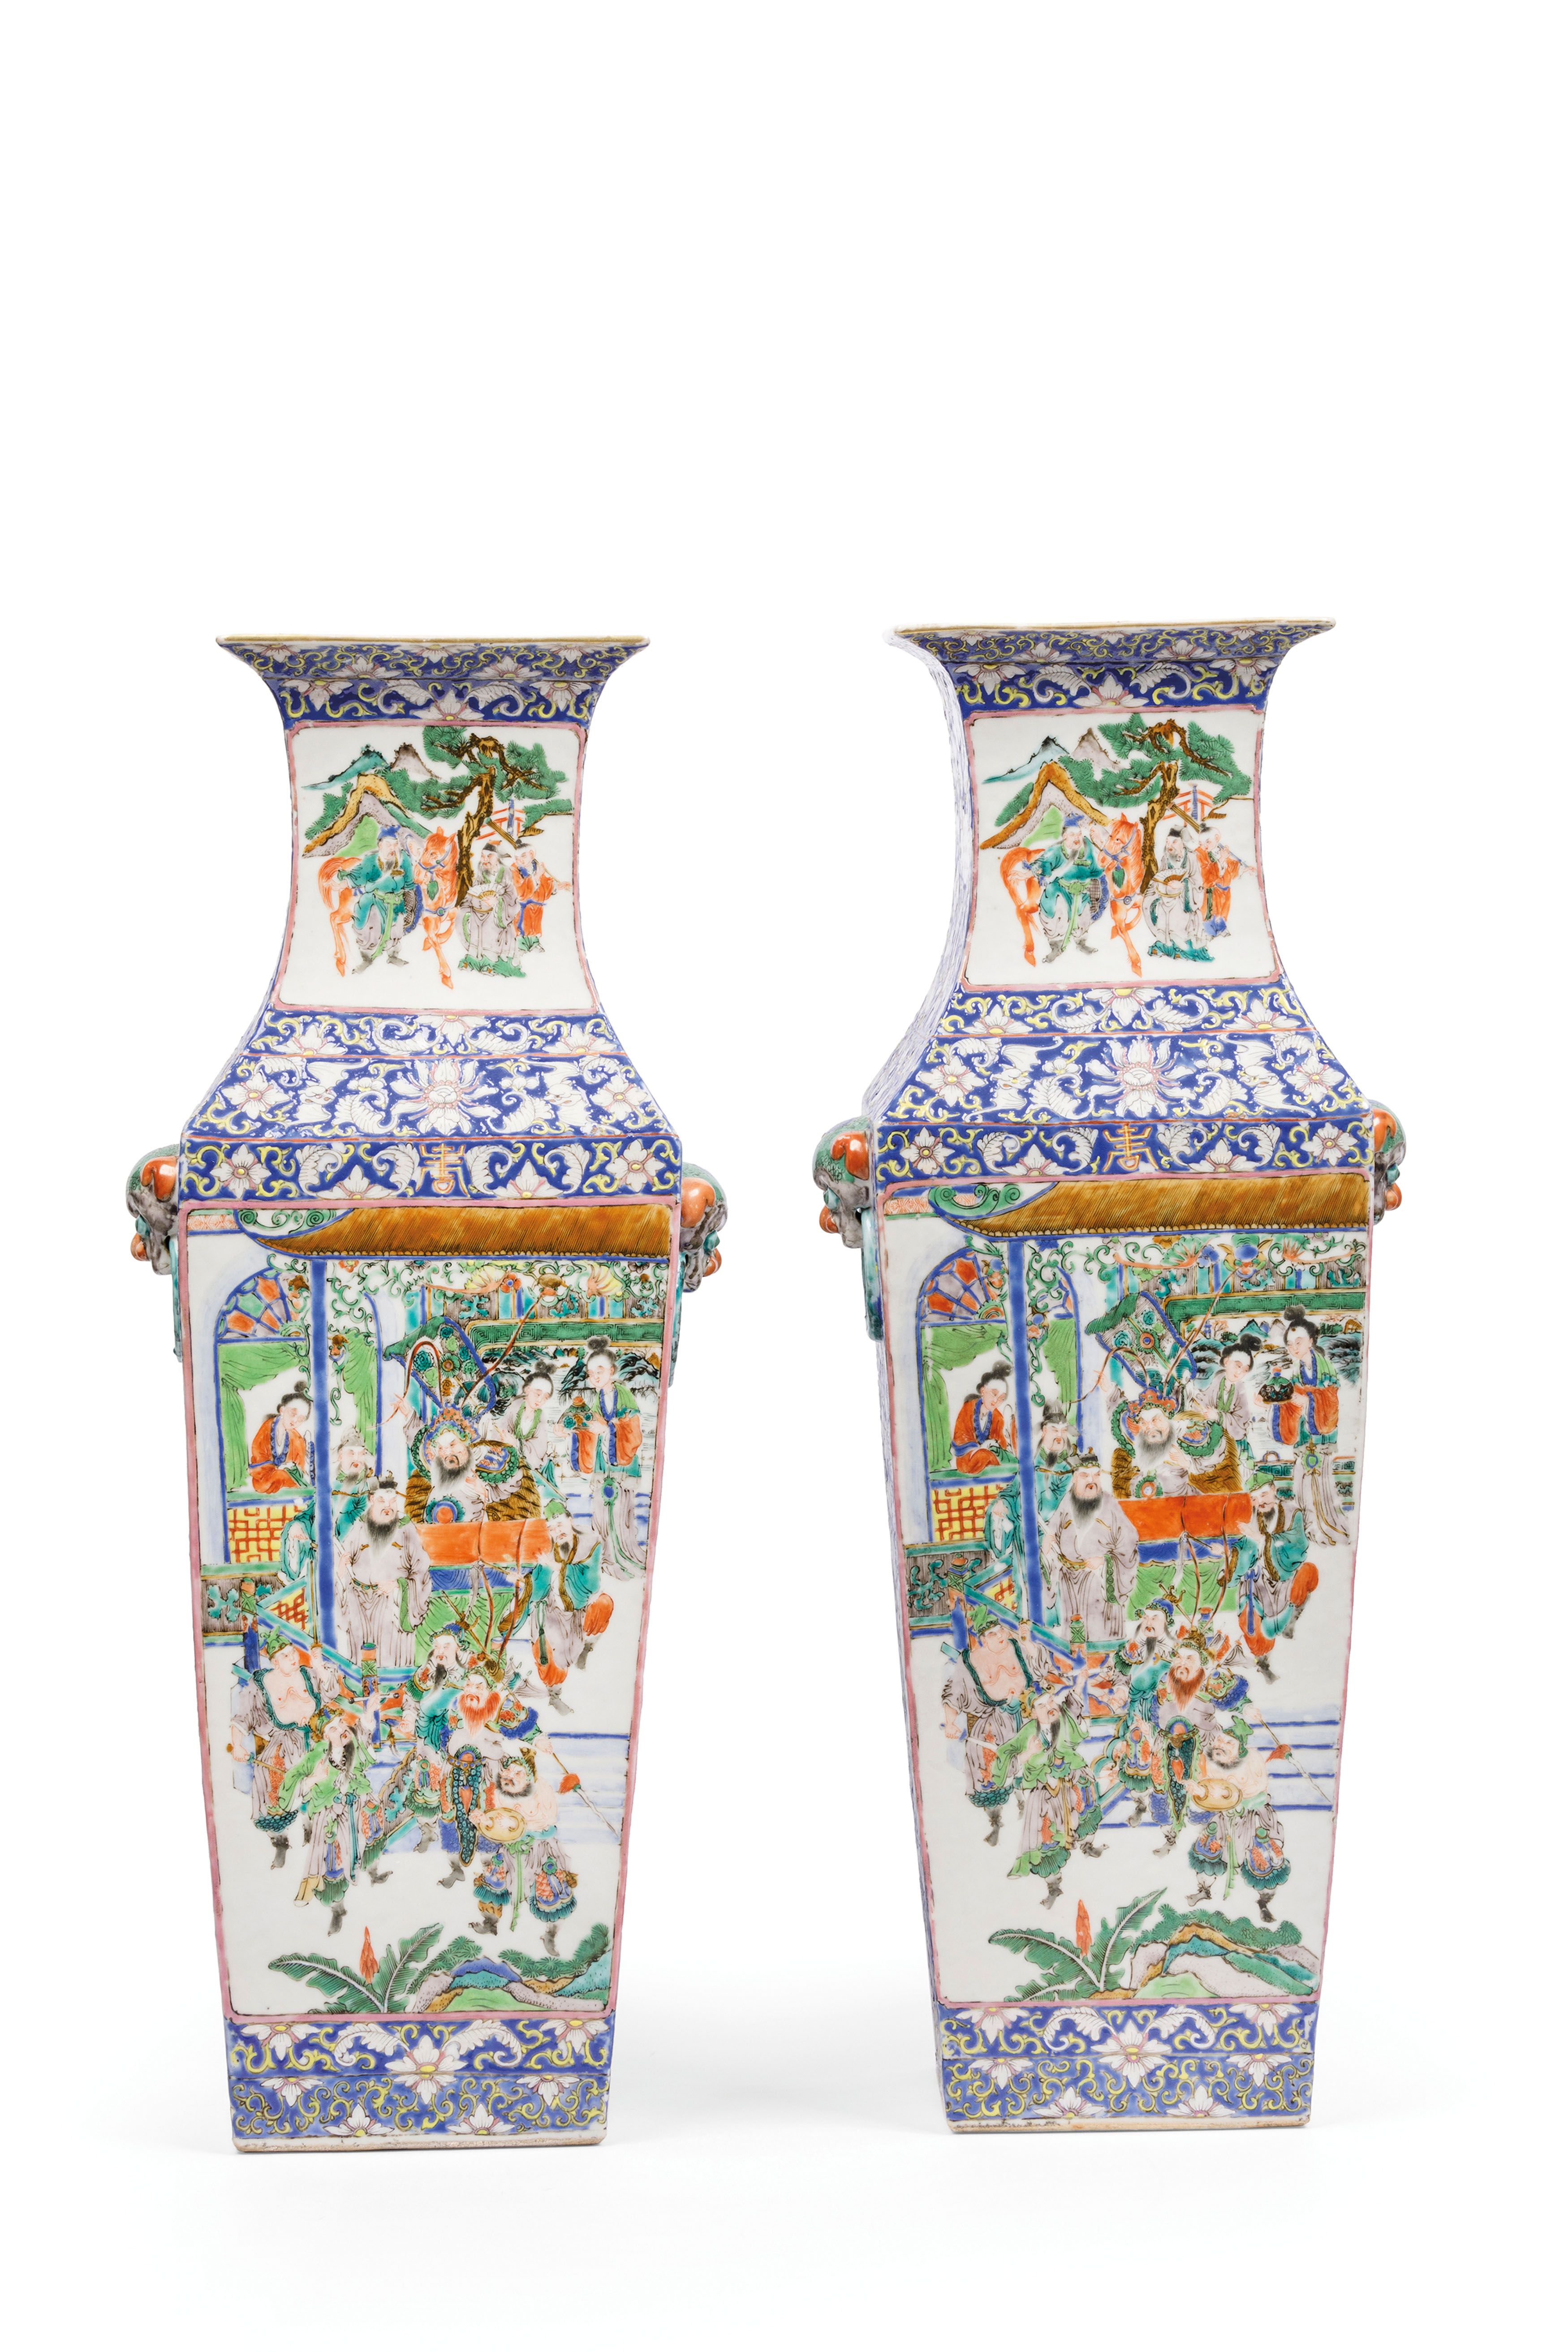 A RARE PAIR OF A LARGE FAMILLE VERT AND BLUE-GROUND PORCELAIN SQUARE VASES, CHINA, 19TH CENTURY (2)